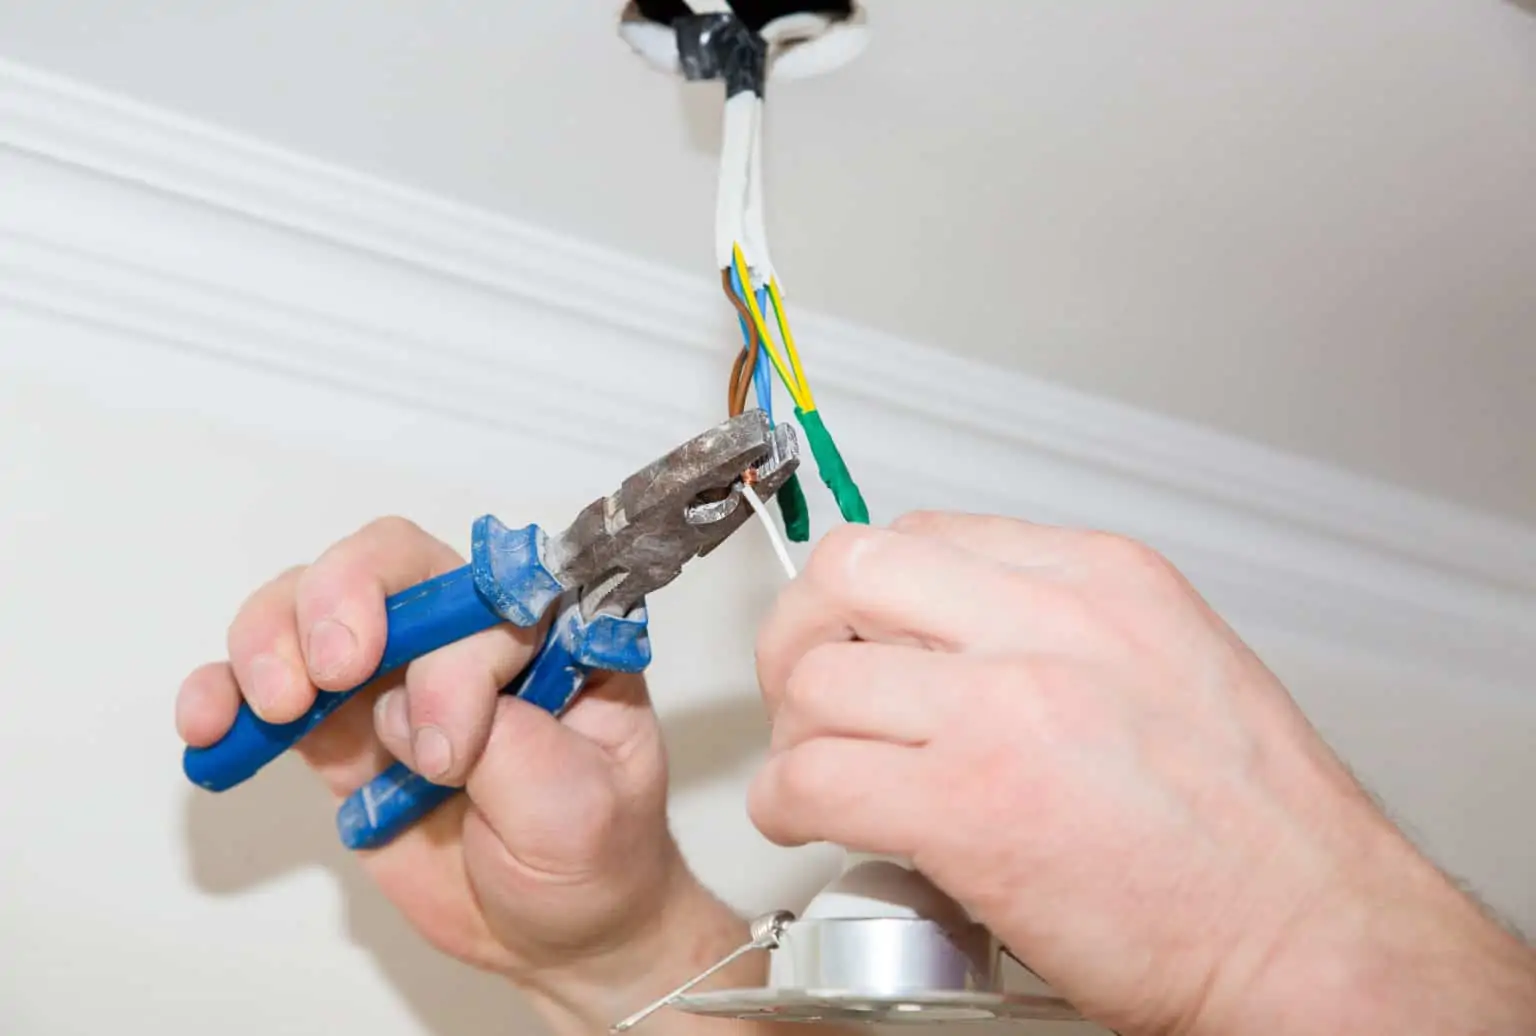 remove ceiling light; how to install a ceiling light